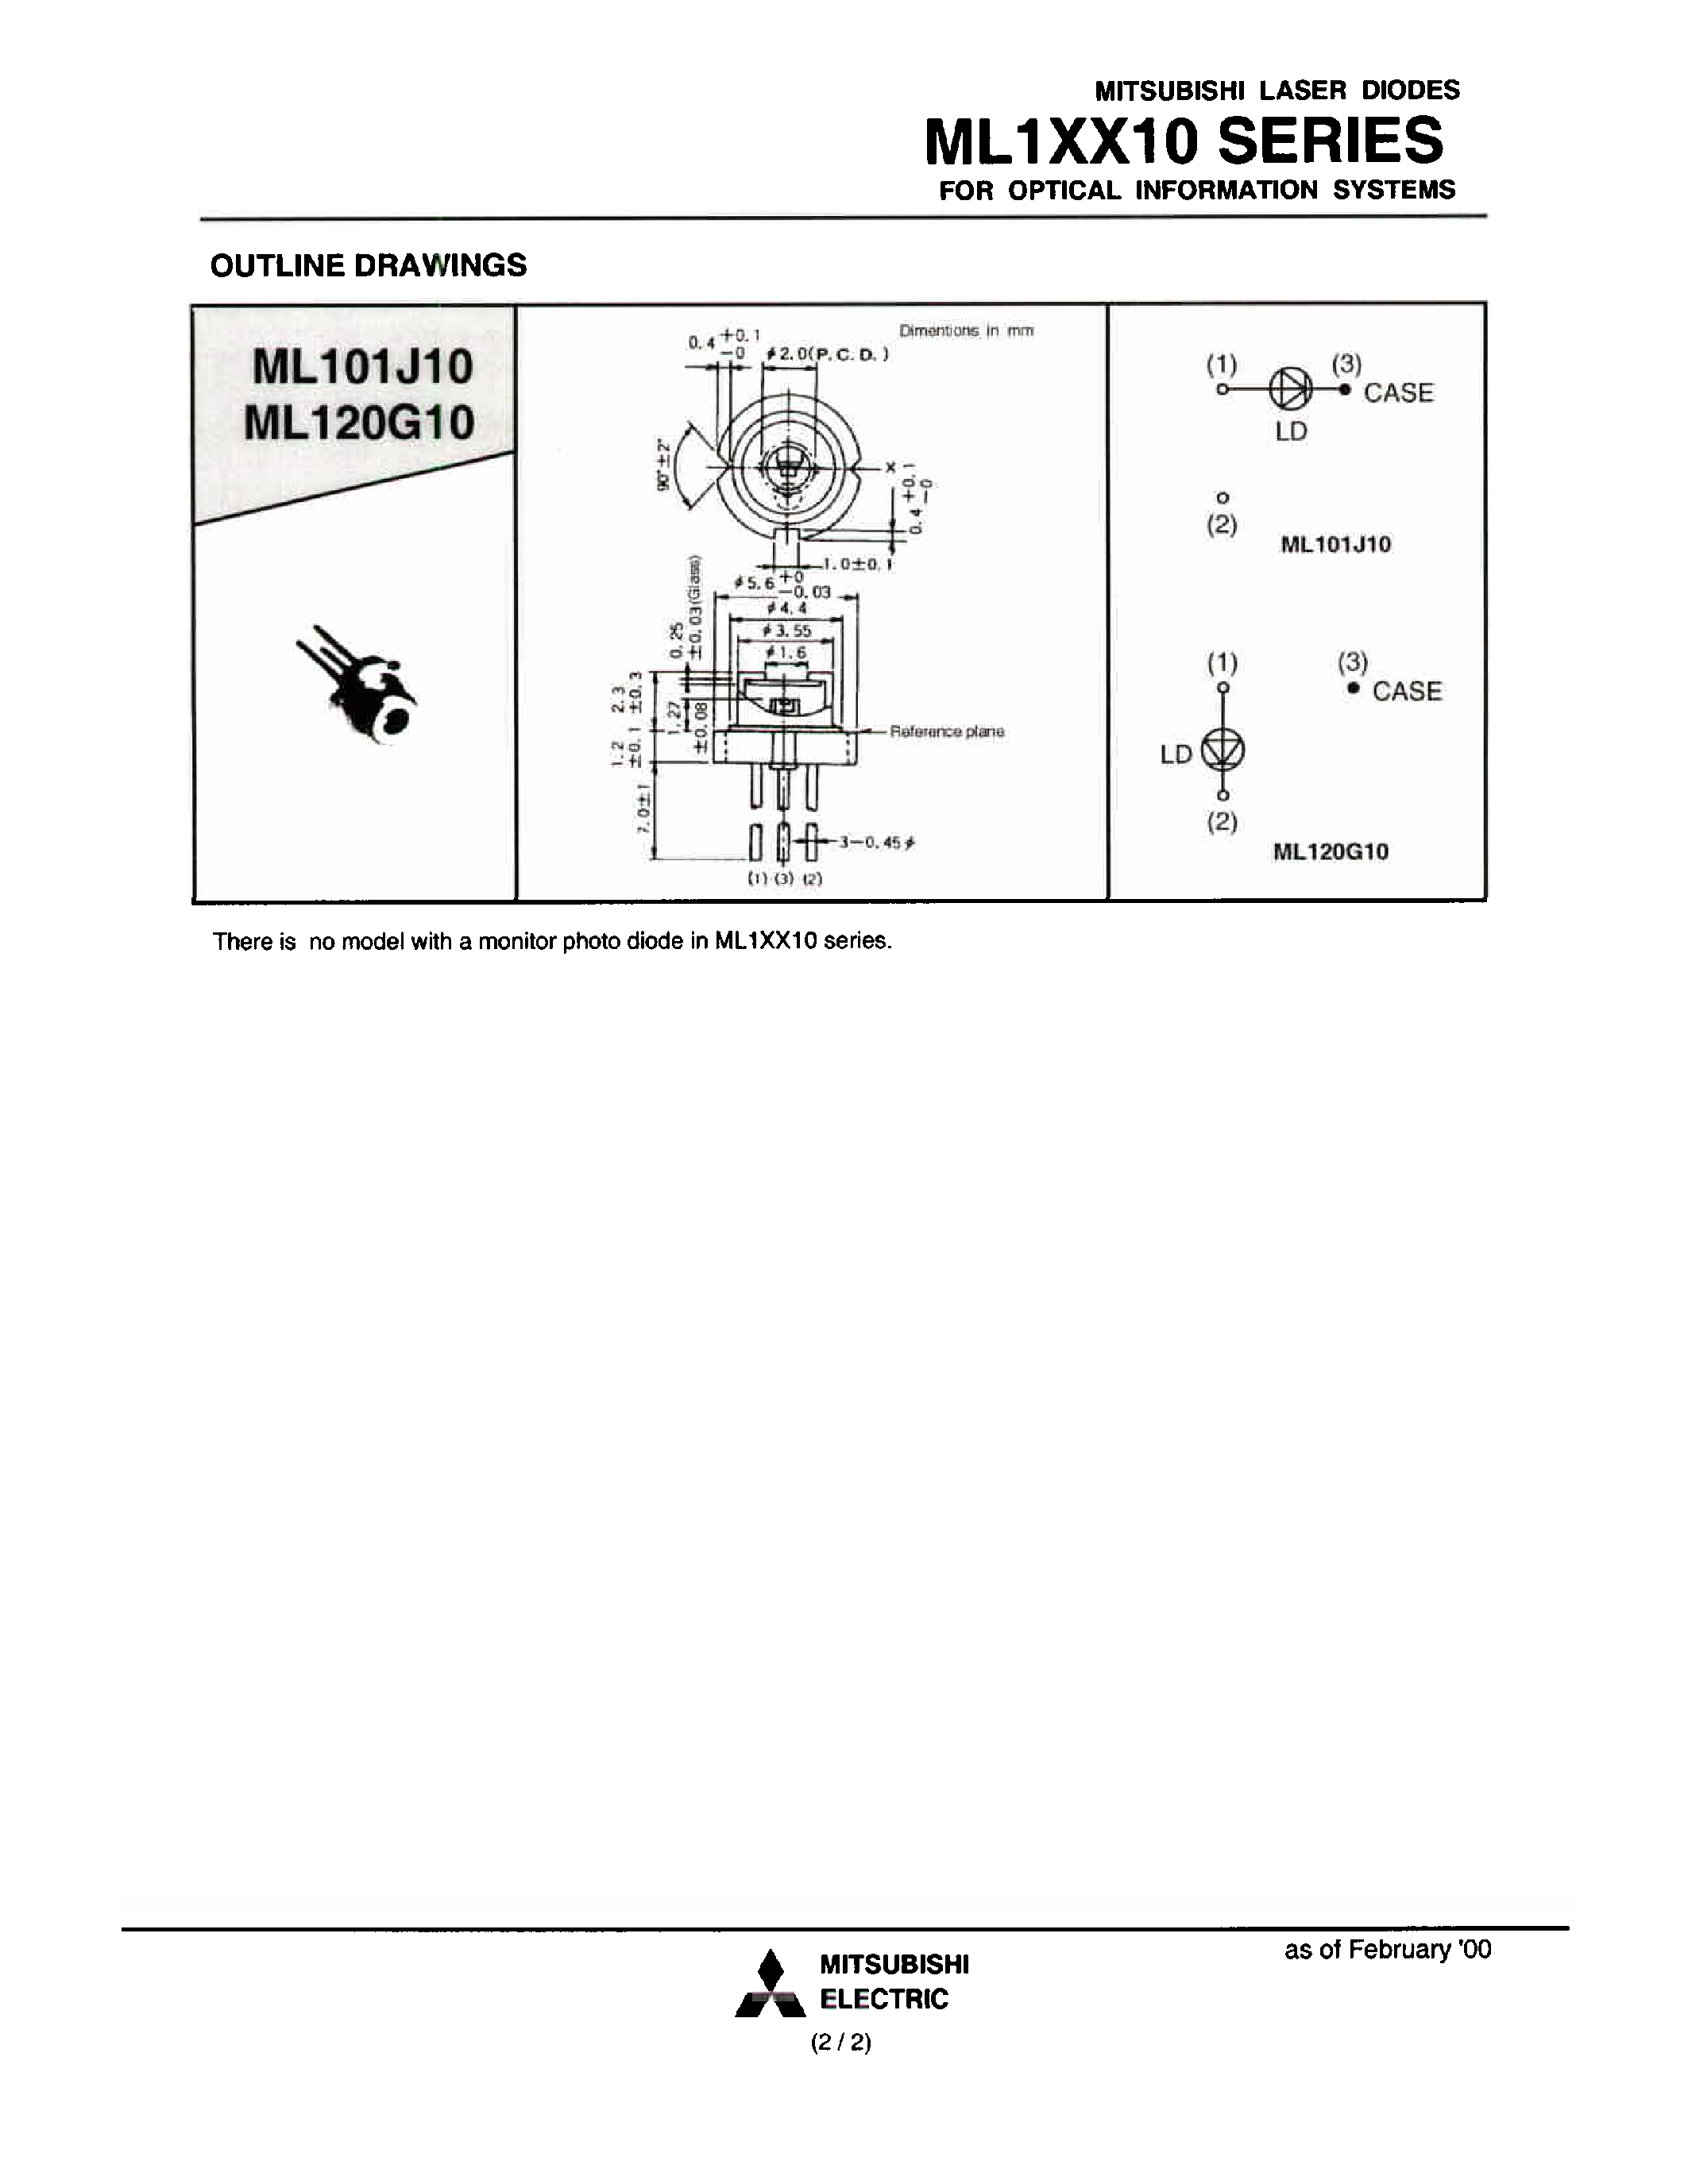 Datasheet ML1XX10 - FOR OPTICAL INFORMATION SYSTEM page 2